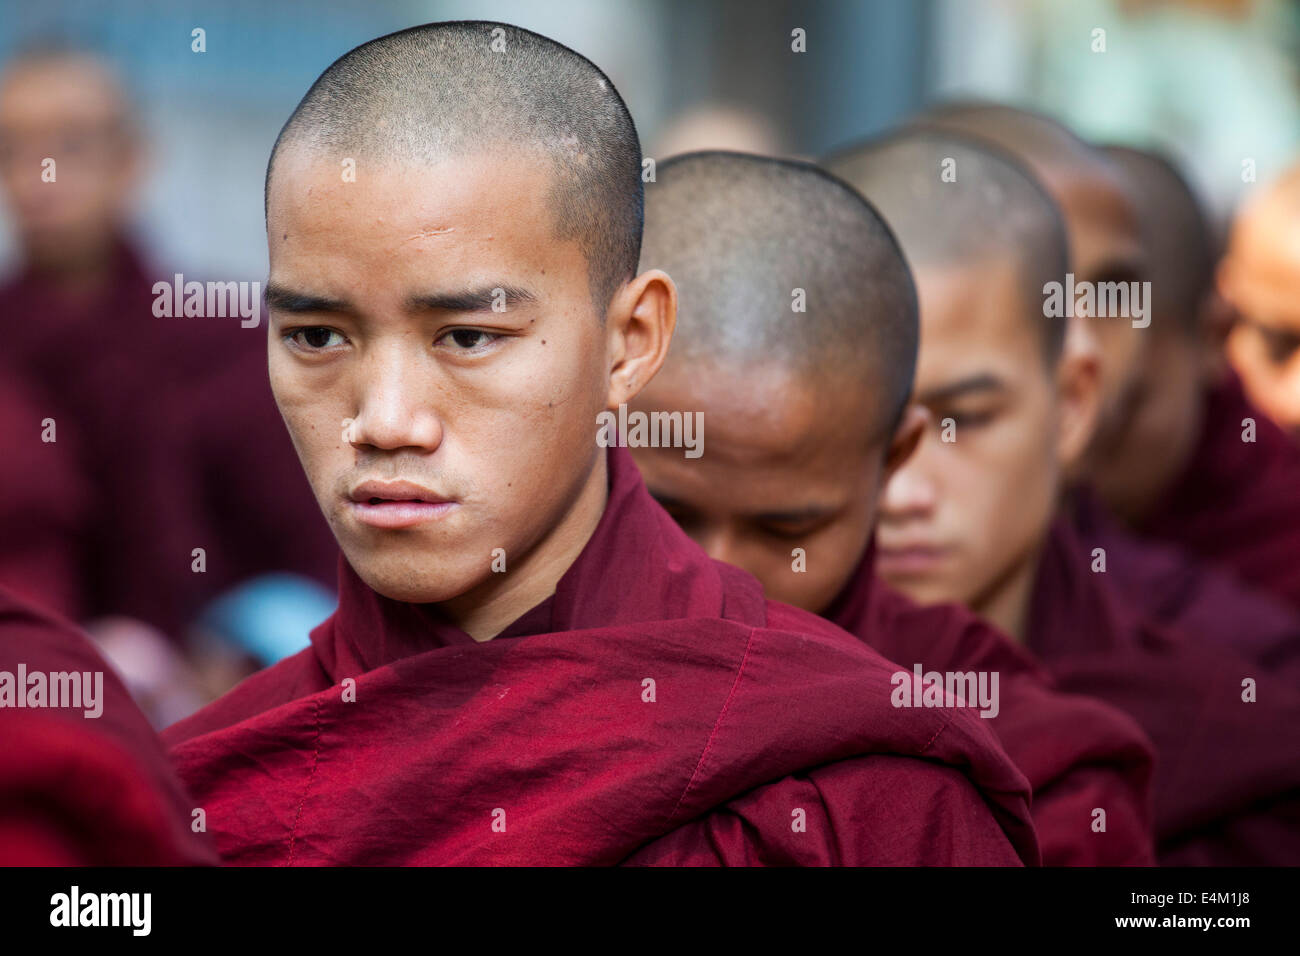 Young Buddhist monks wait in line for food during an Alms Ceremony at the Maha Aung Mye Bonzan Monastery in Mandalay, Myanmar. Stock Photo